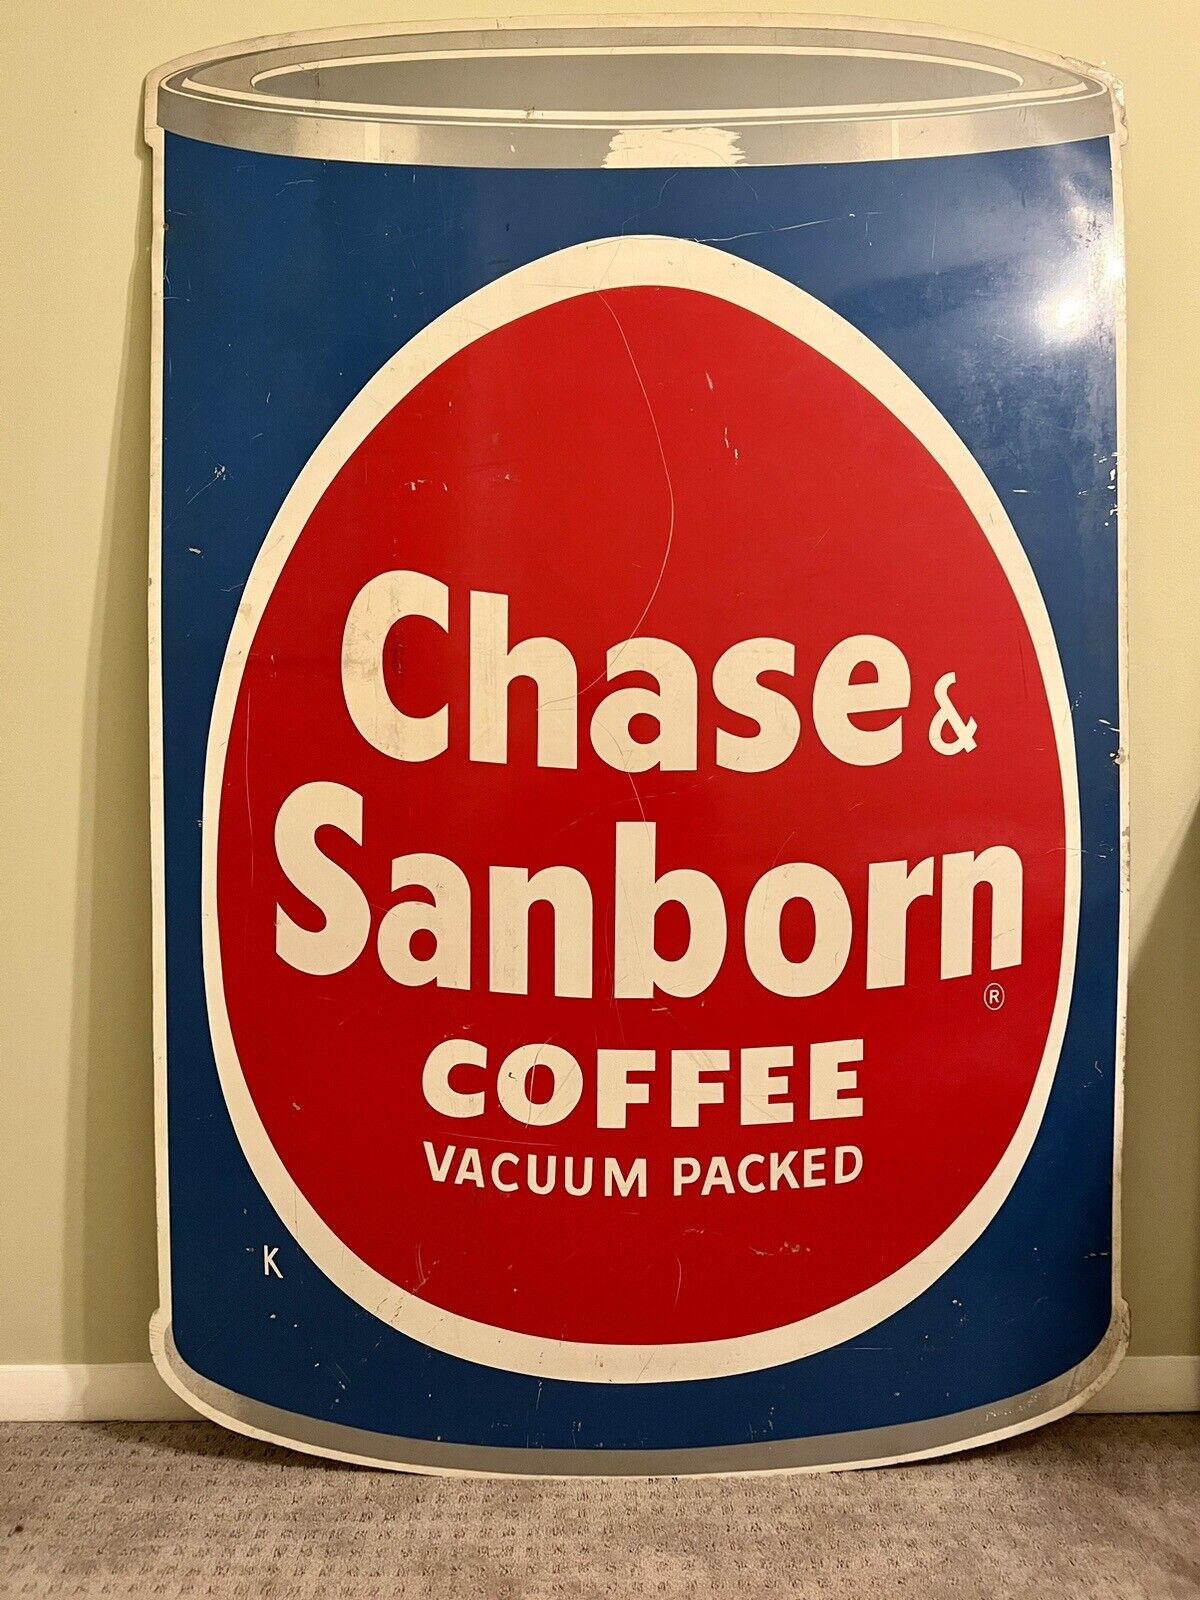 MASSIVE Vintage 1950's-60's CHASE & SANBORN COFFEE CAN Metal Advertising Sign